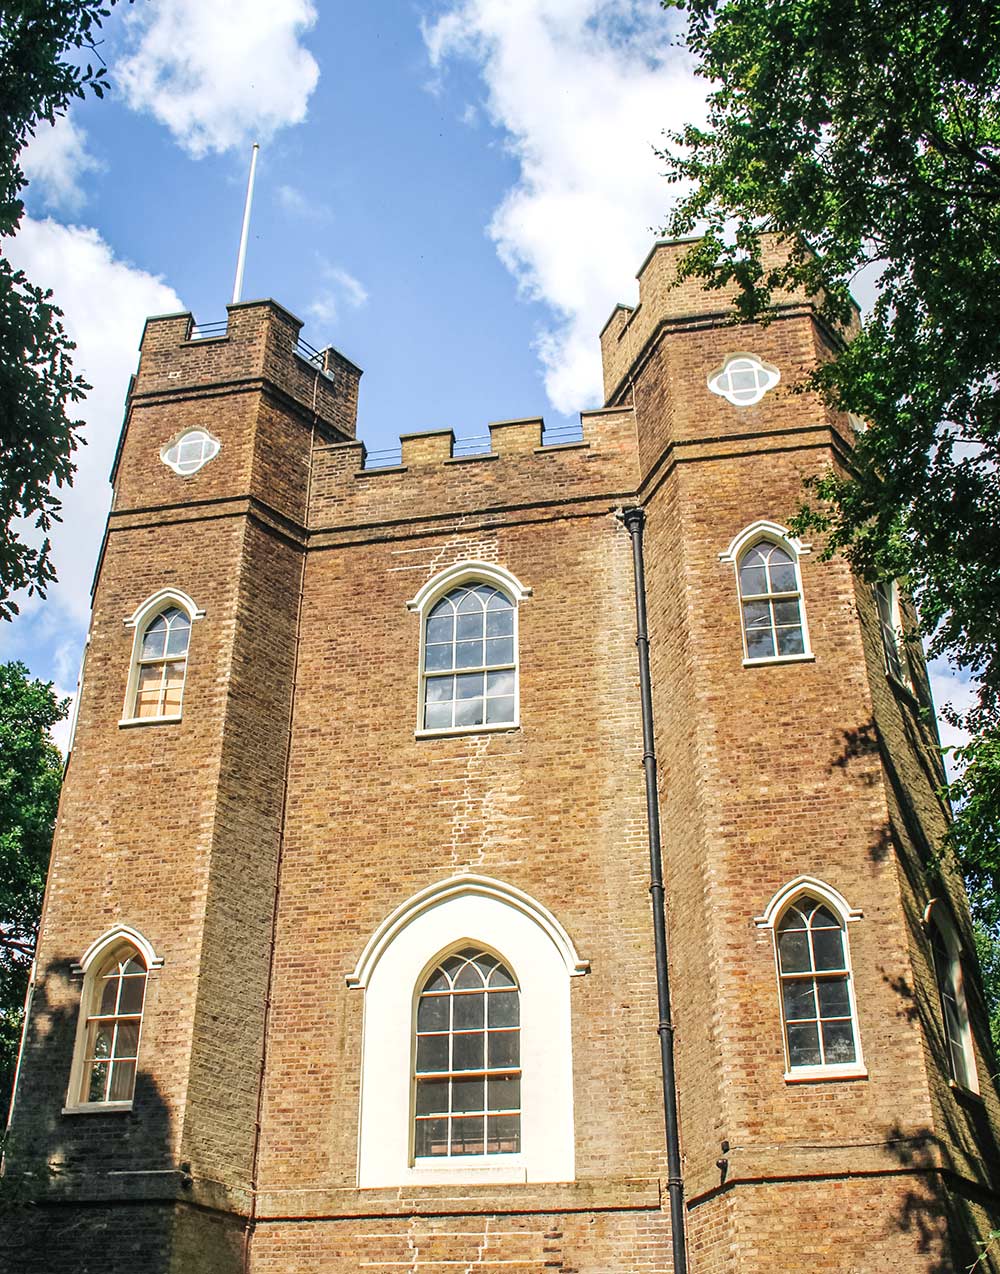 Severndroog Castle Shooters Hill London - local area guide